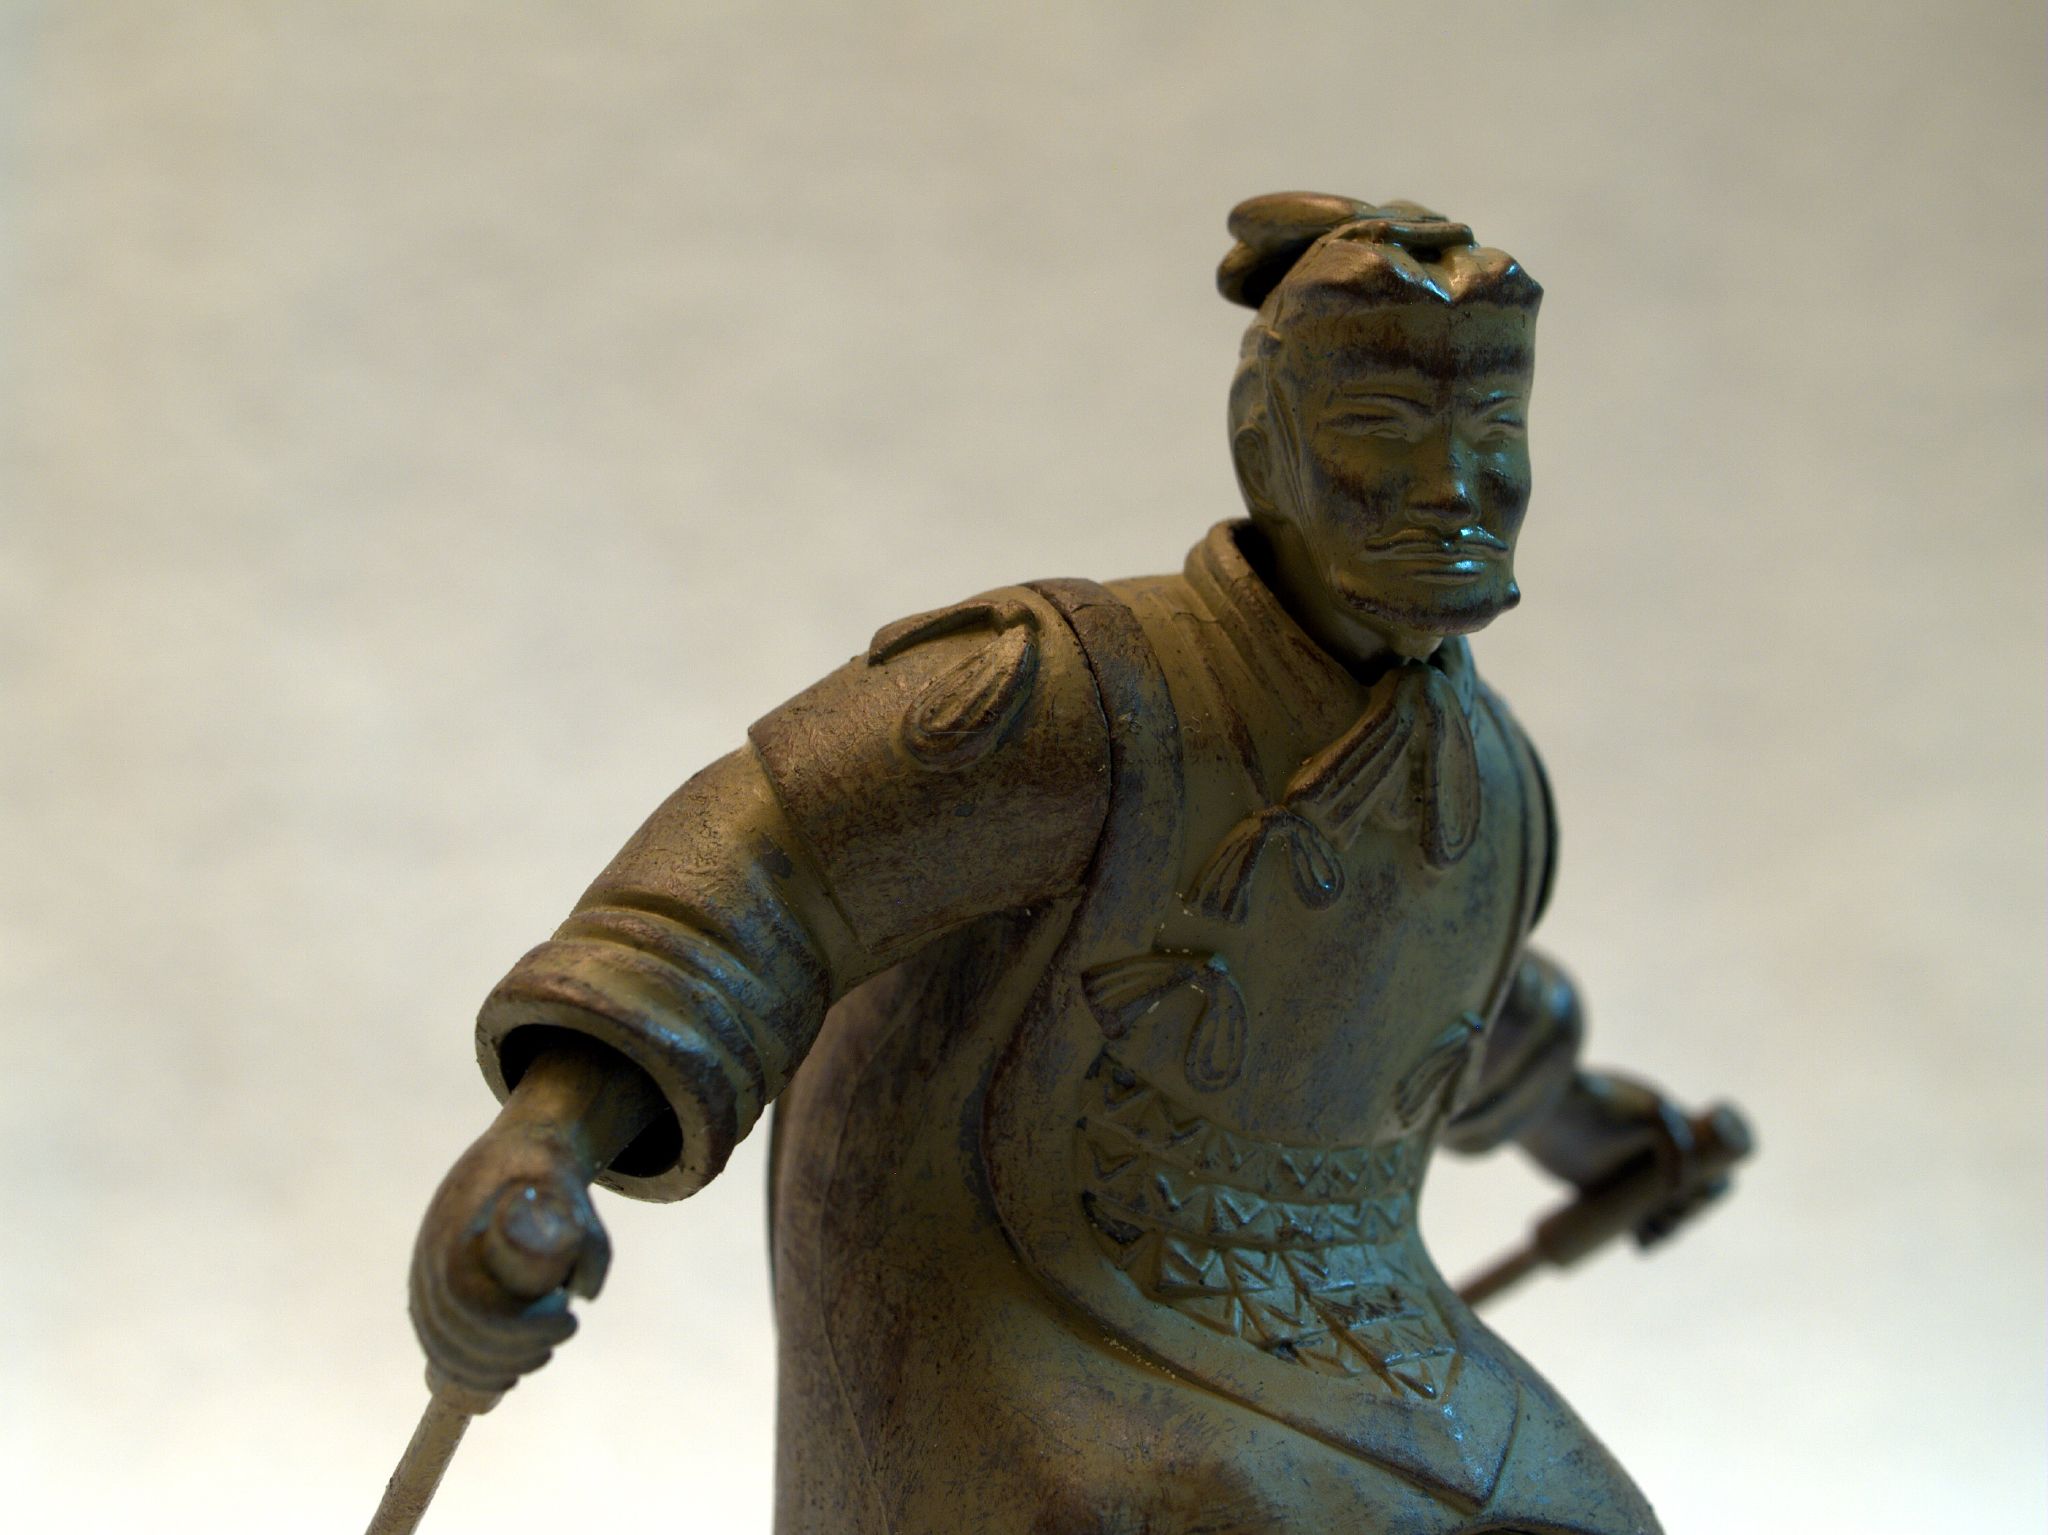 a small statue of a man holding a sword